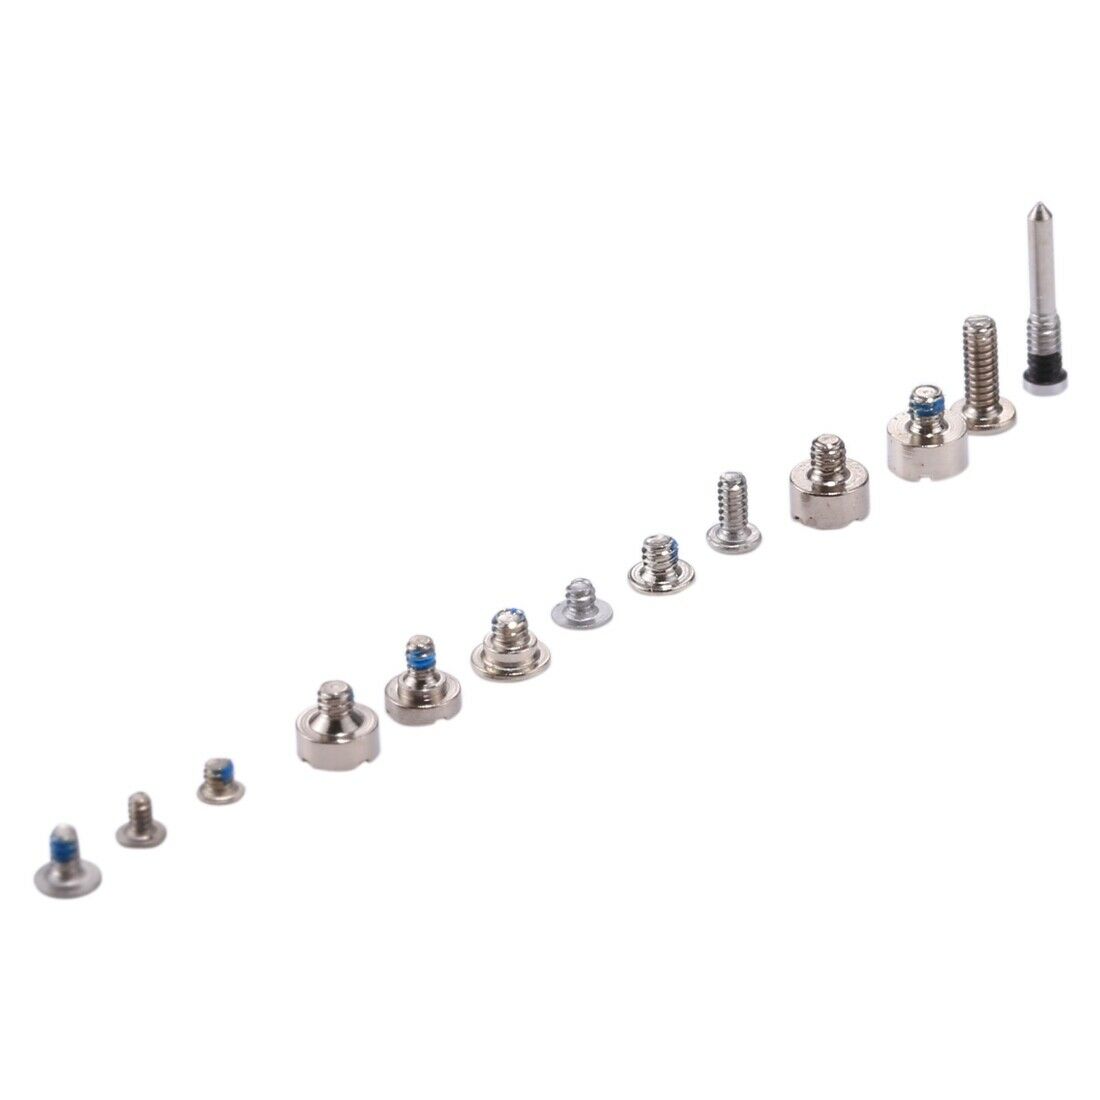 Apple iPhone X Full Screw Set including the 2 White Bottom Screws for [product_price] - First Help Tech